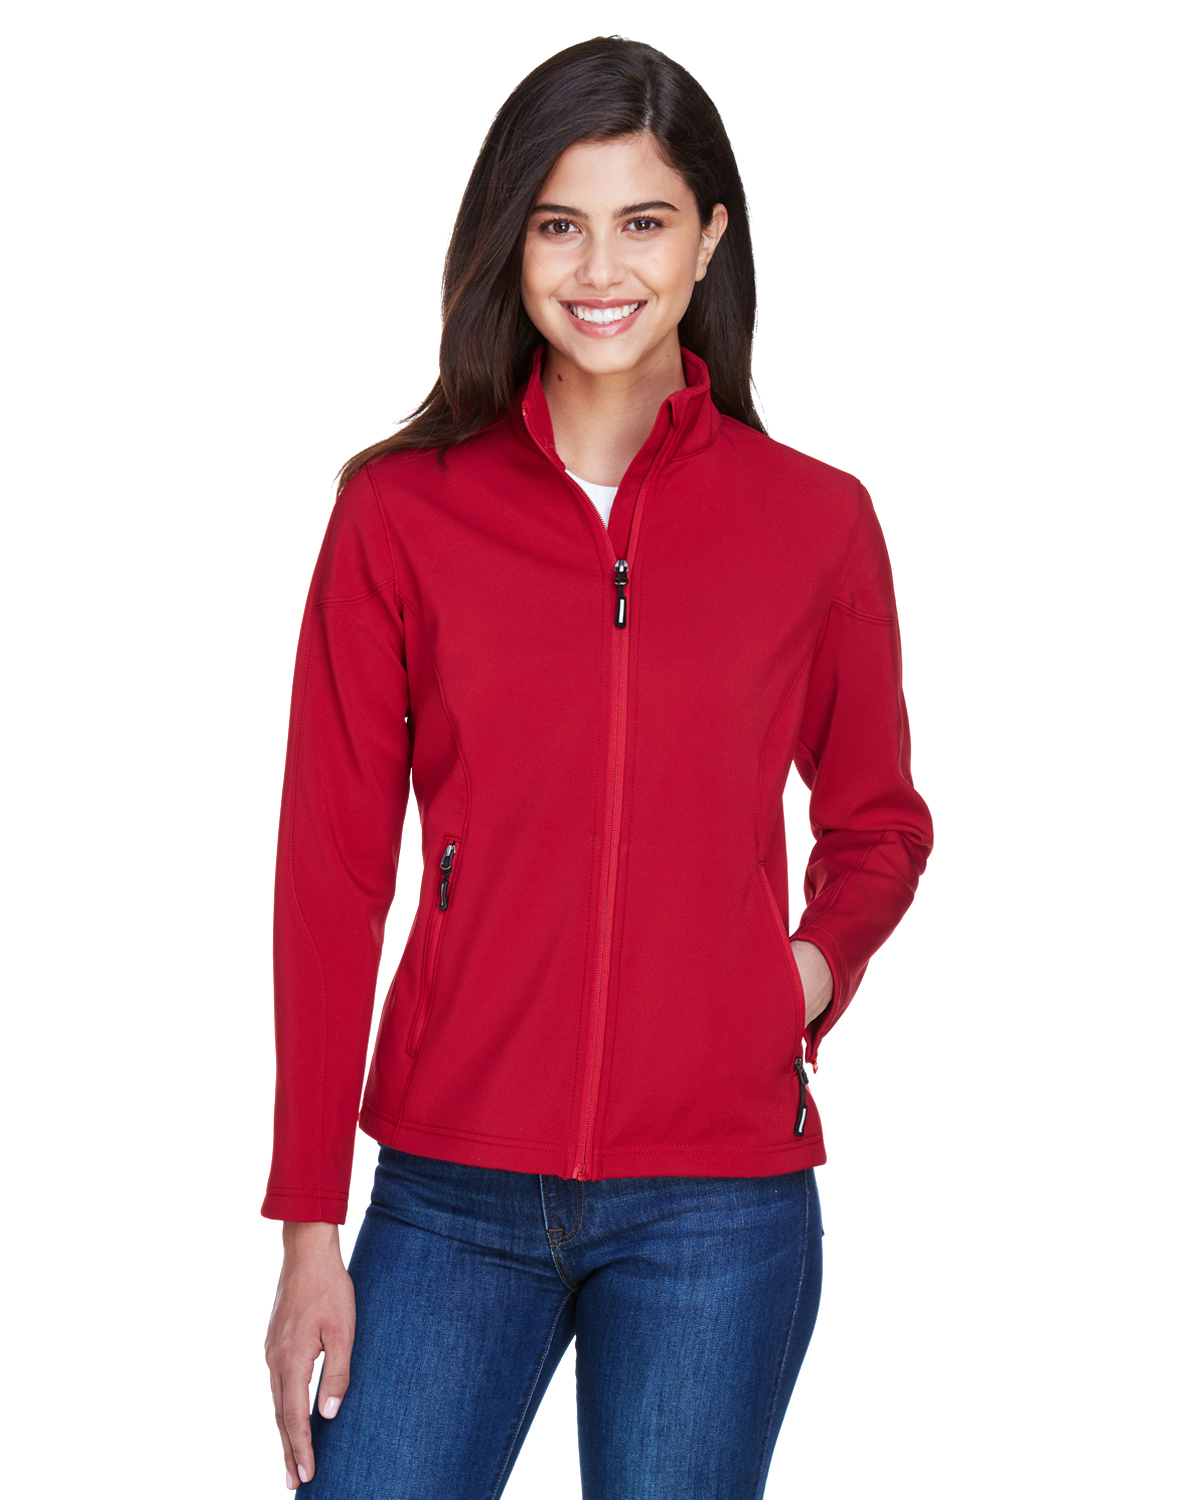 Ladies' Cruise Two-Layer Fleece Bonded Soft&nbsp;Shell Jacket - CLASSIC RED - M - image 1 of 3